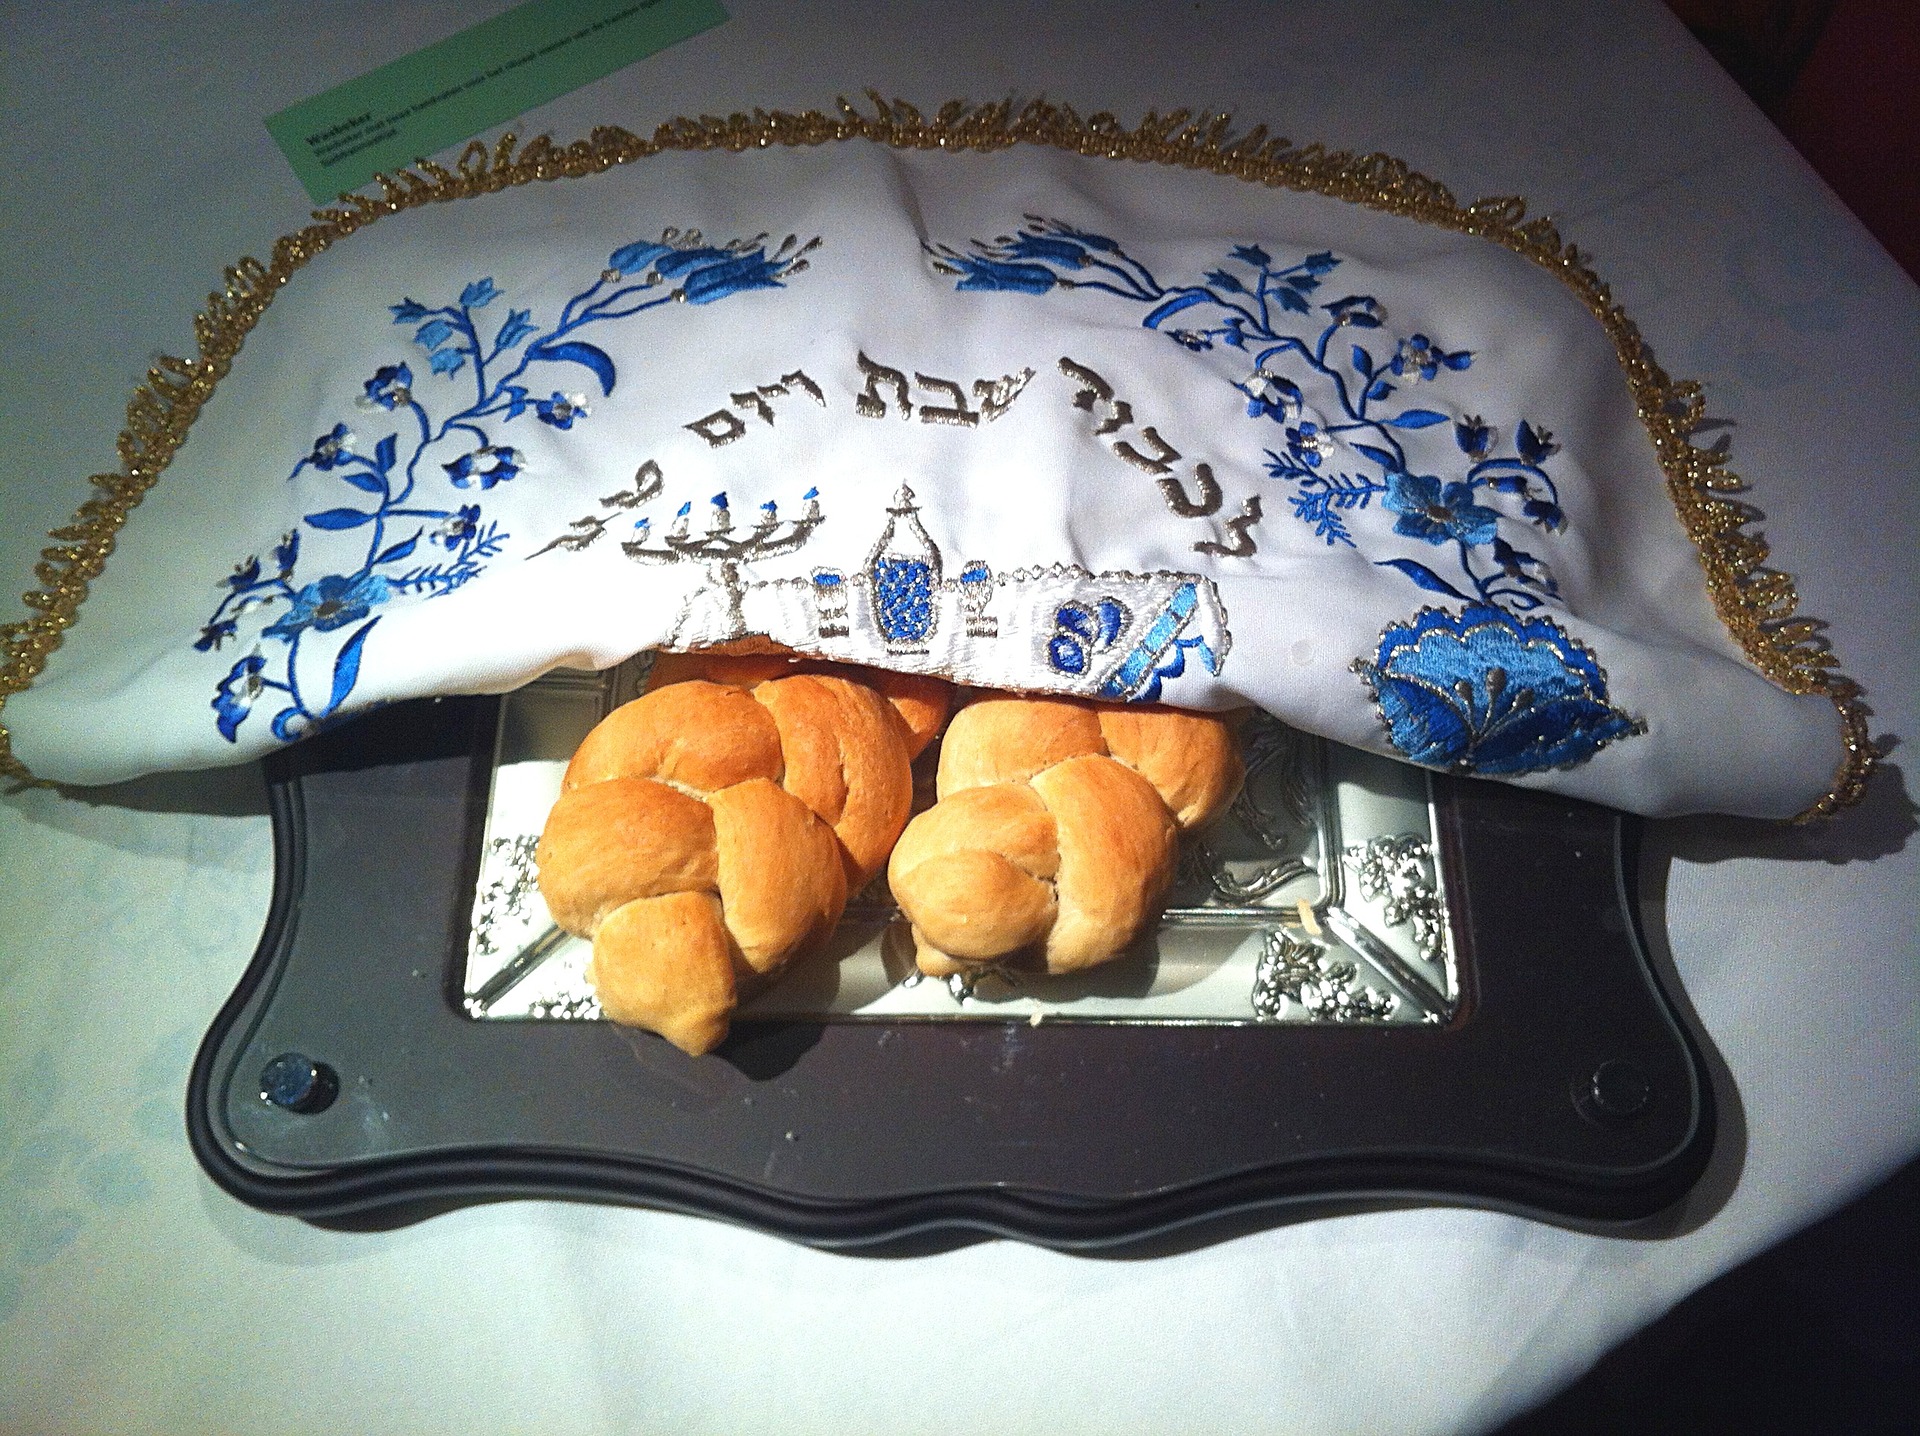 eating disorders in the Orthodox Jewish community